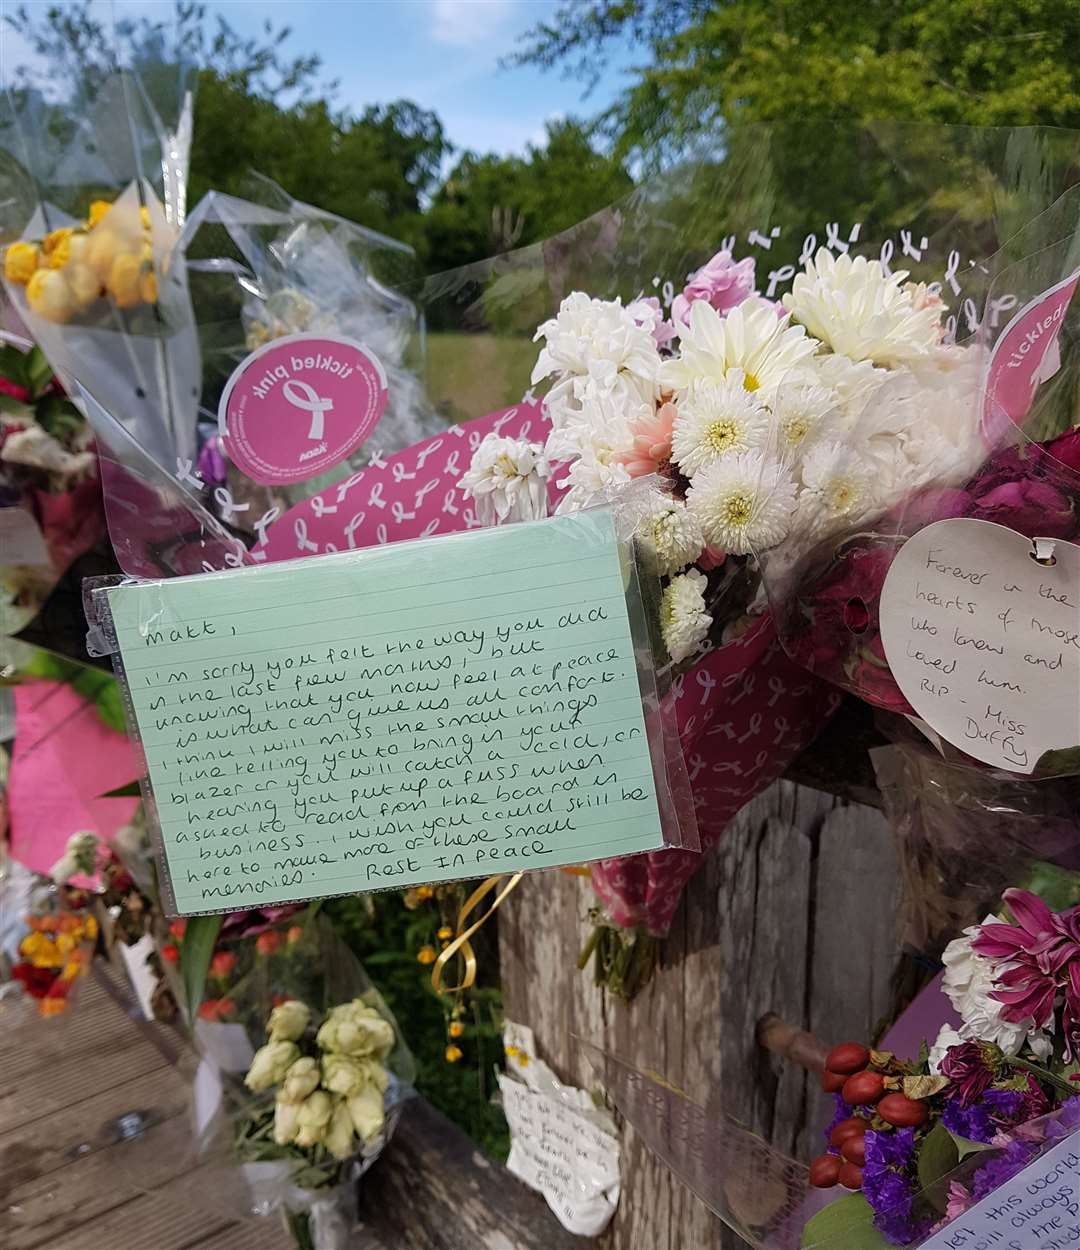 Flowers and messages gathered in Dunorlan Park